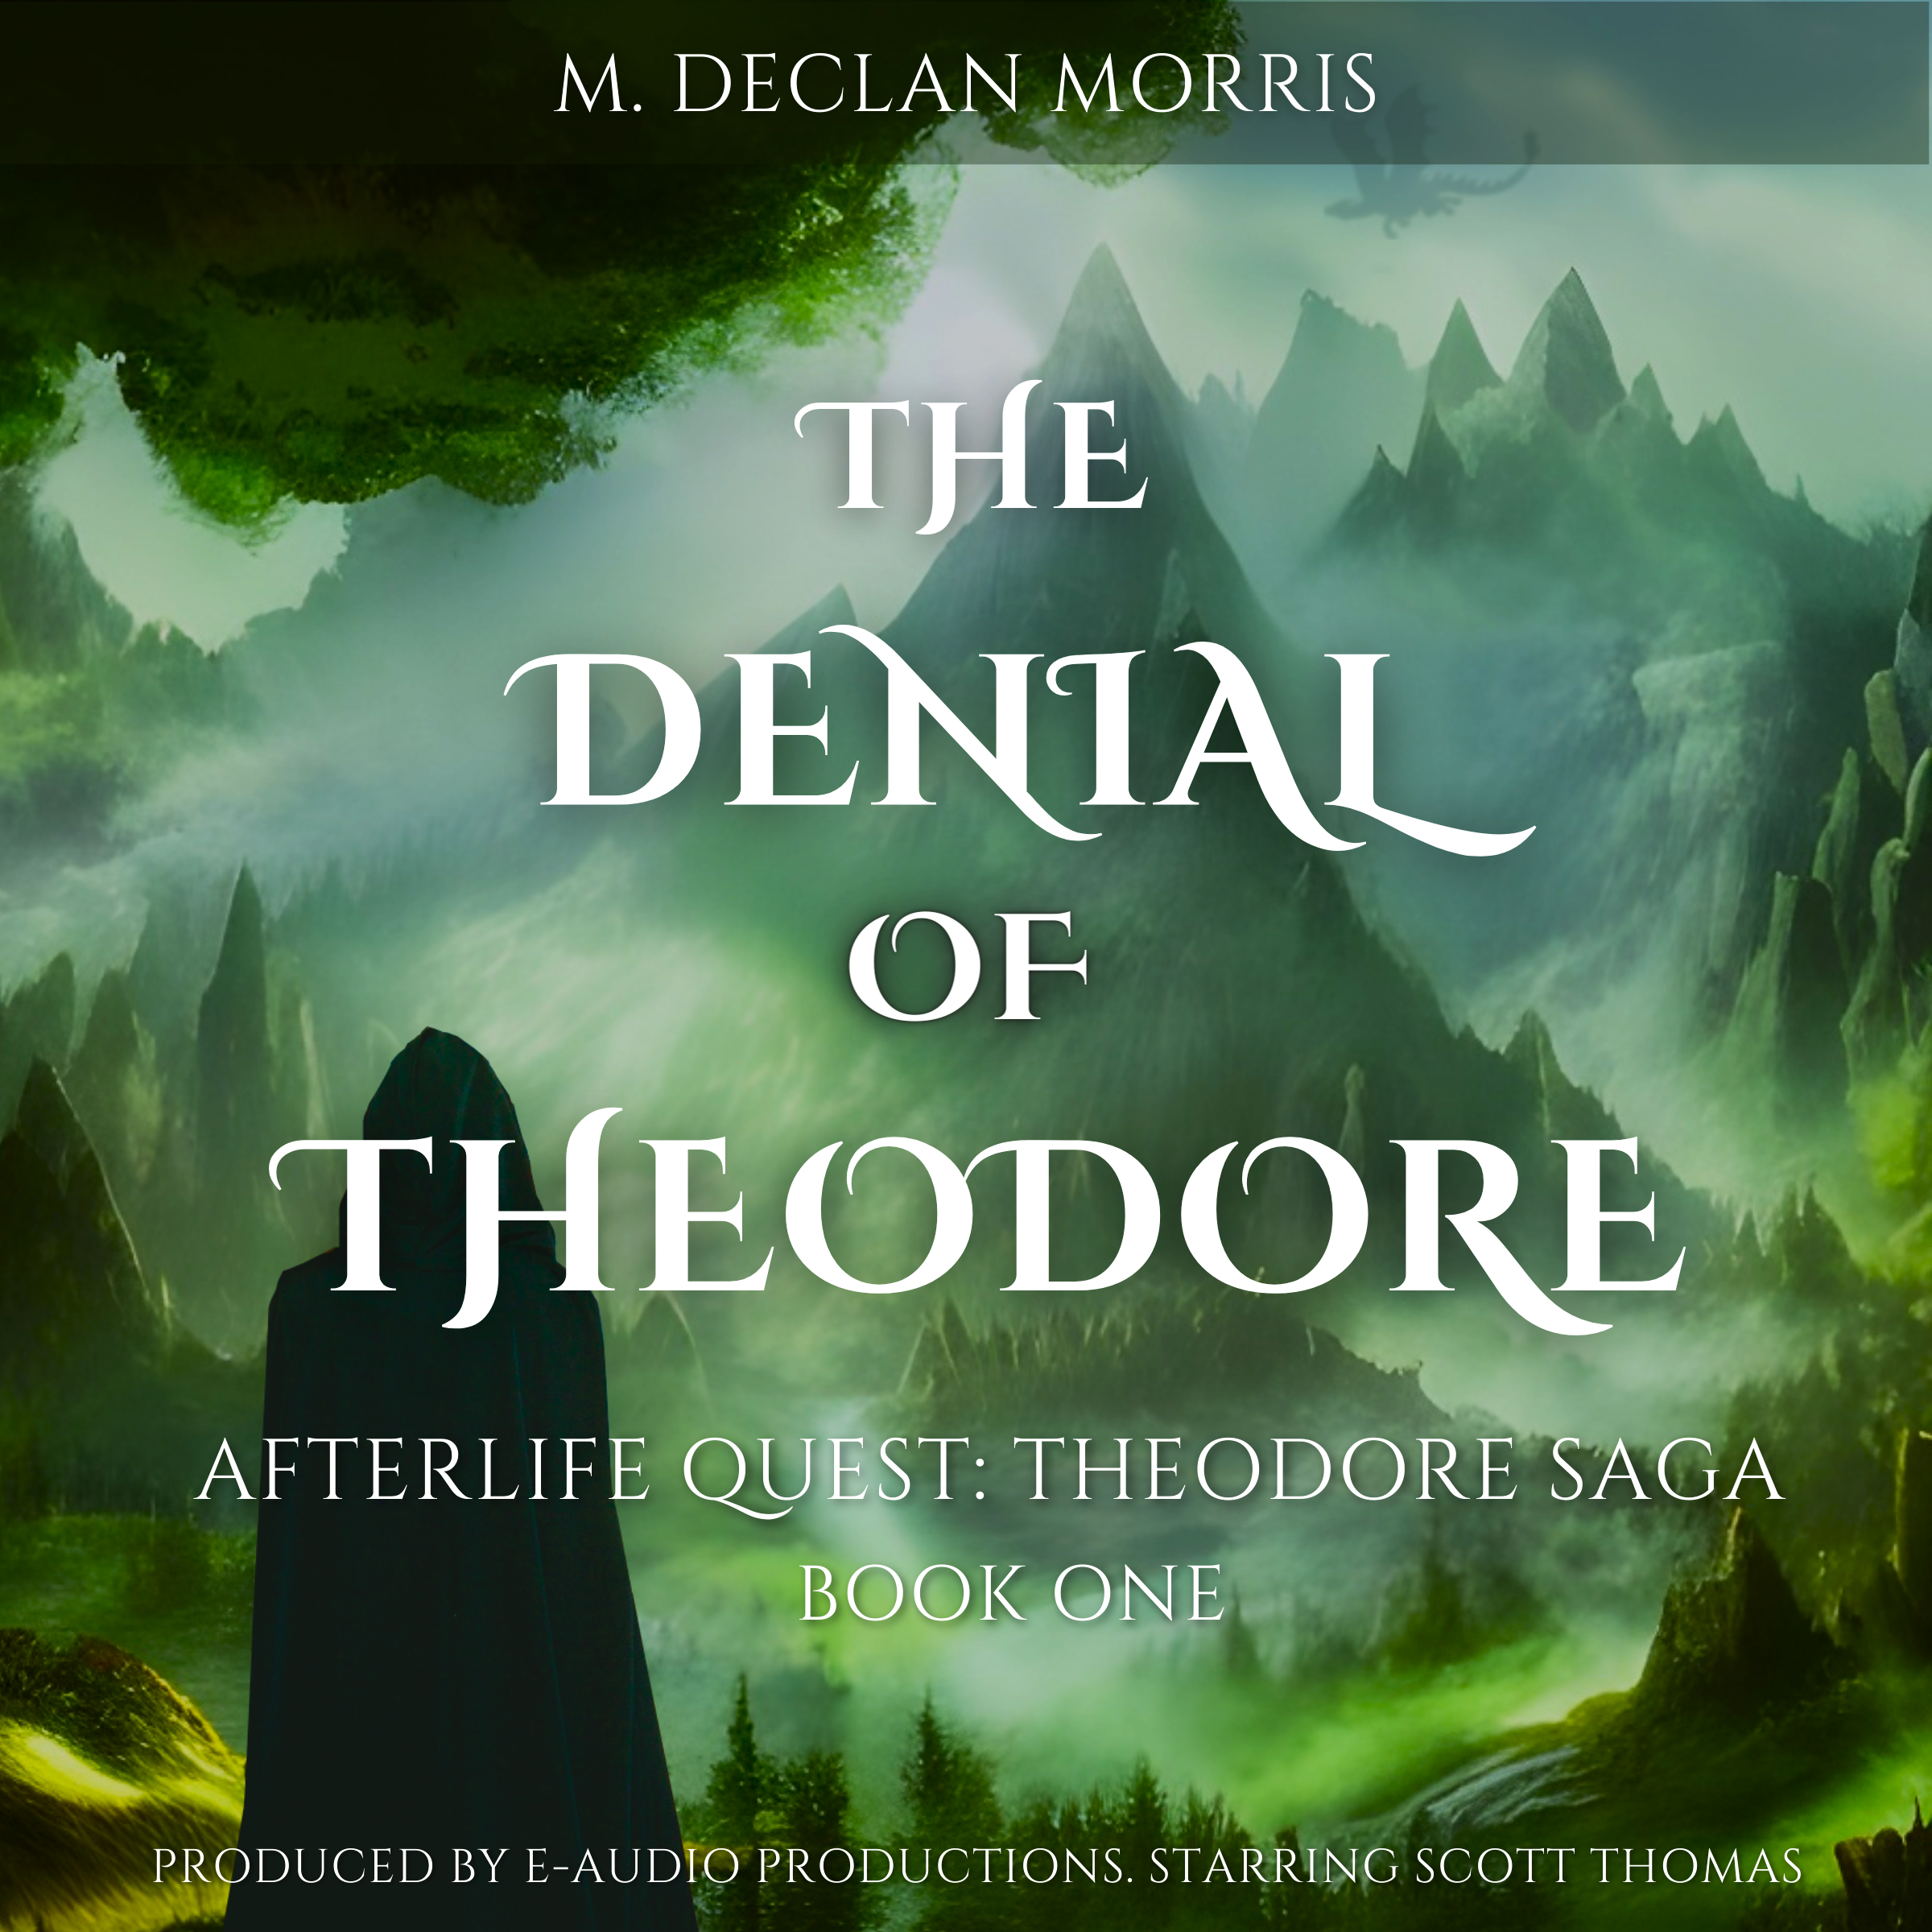 image for The Denial of Theodore Afterlife Quest: Theodore Saga, Book 1